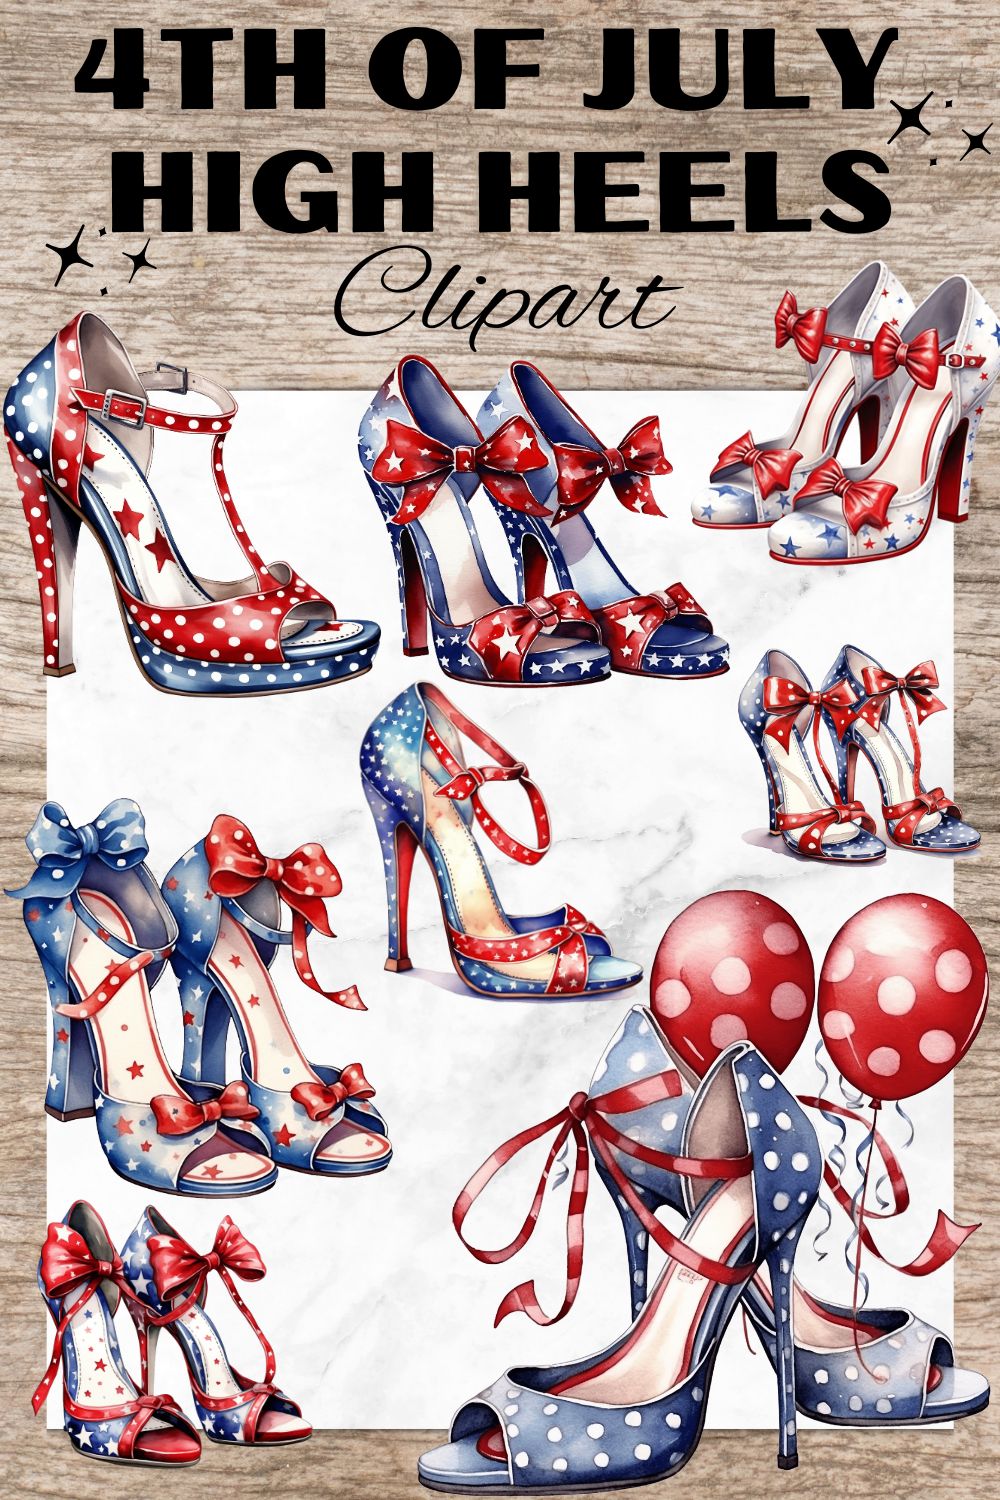 9 American 4th of July High Heels PNG, Watercolor Clipart, American High Heels, Transparent PNG, Digital Paper Craft, Illustrations, Watercolor Clipart for Scrapbook, Invitation, Wall Art, T-Shirt Design pinterest preview image.